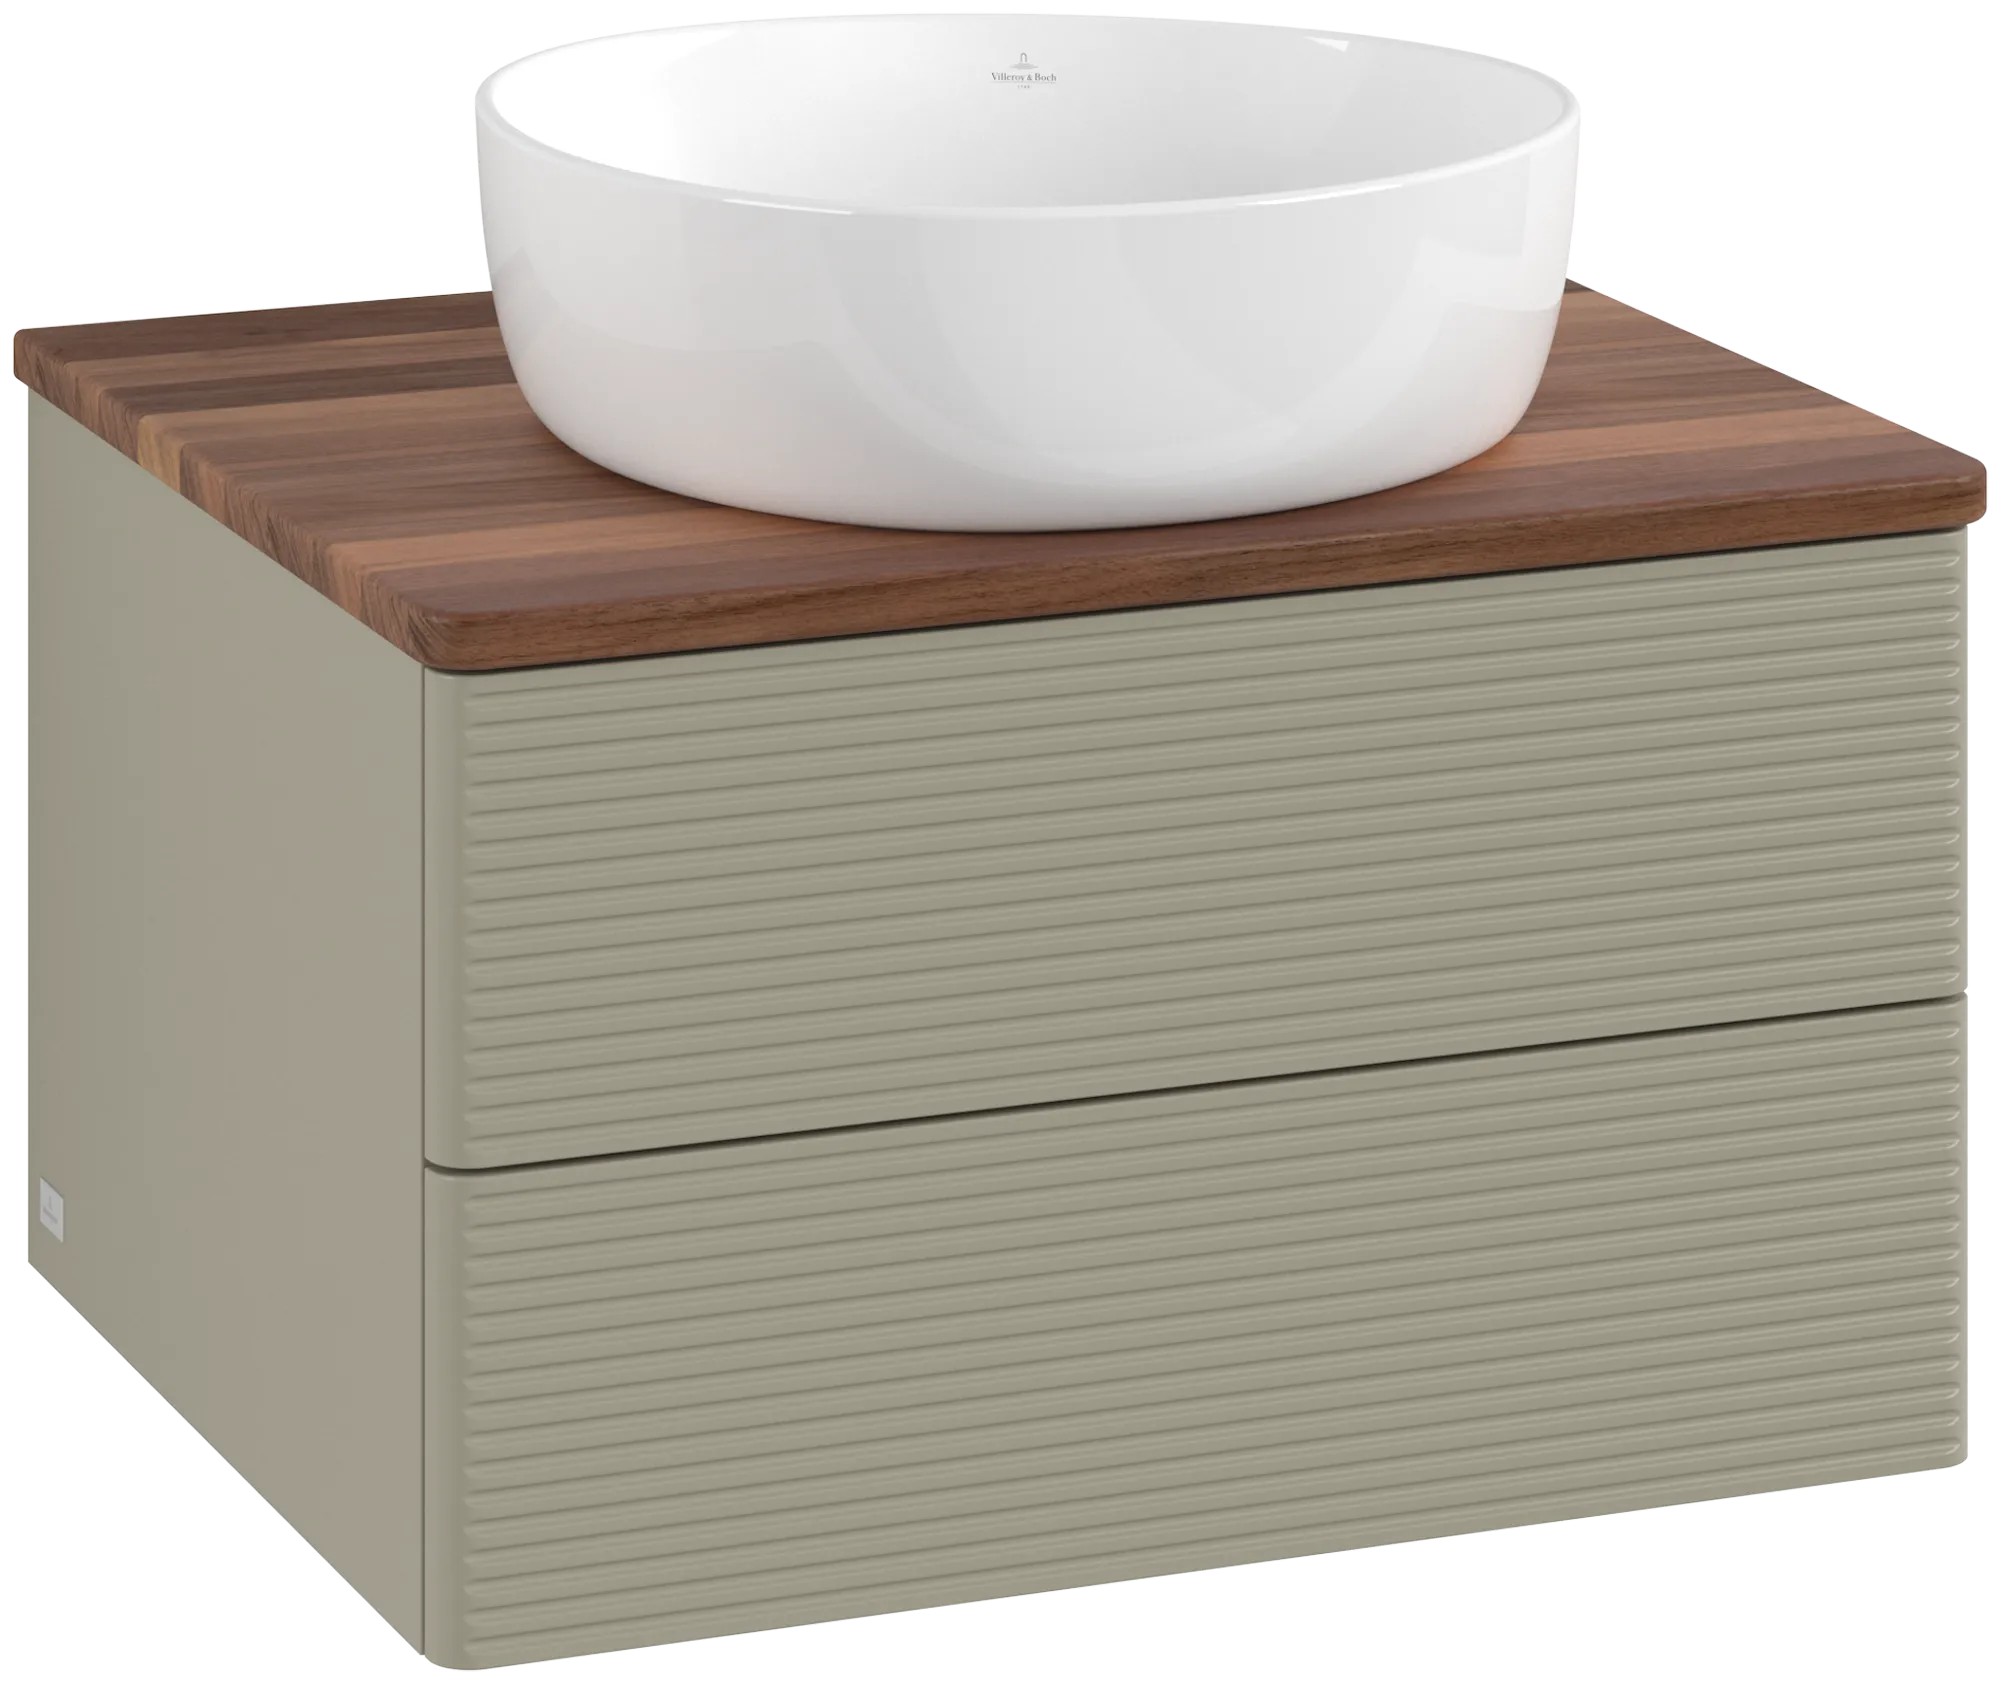 VILLEROY BOCH Antao Vanity unit, with lighting, 2 pull-out compartments, 600 x 360 x 500 mm, Front with grain texture, Stone Grey Matt Lacquer / Warm Walnut #L18112HK resmi